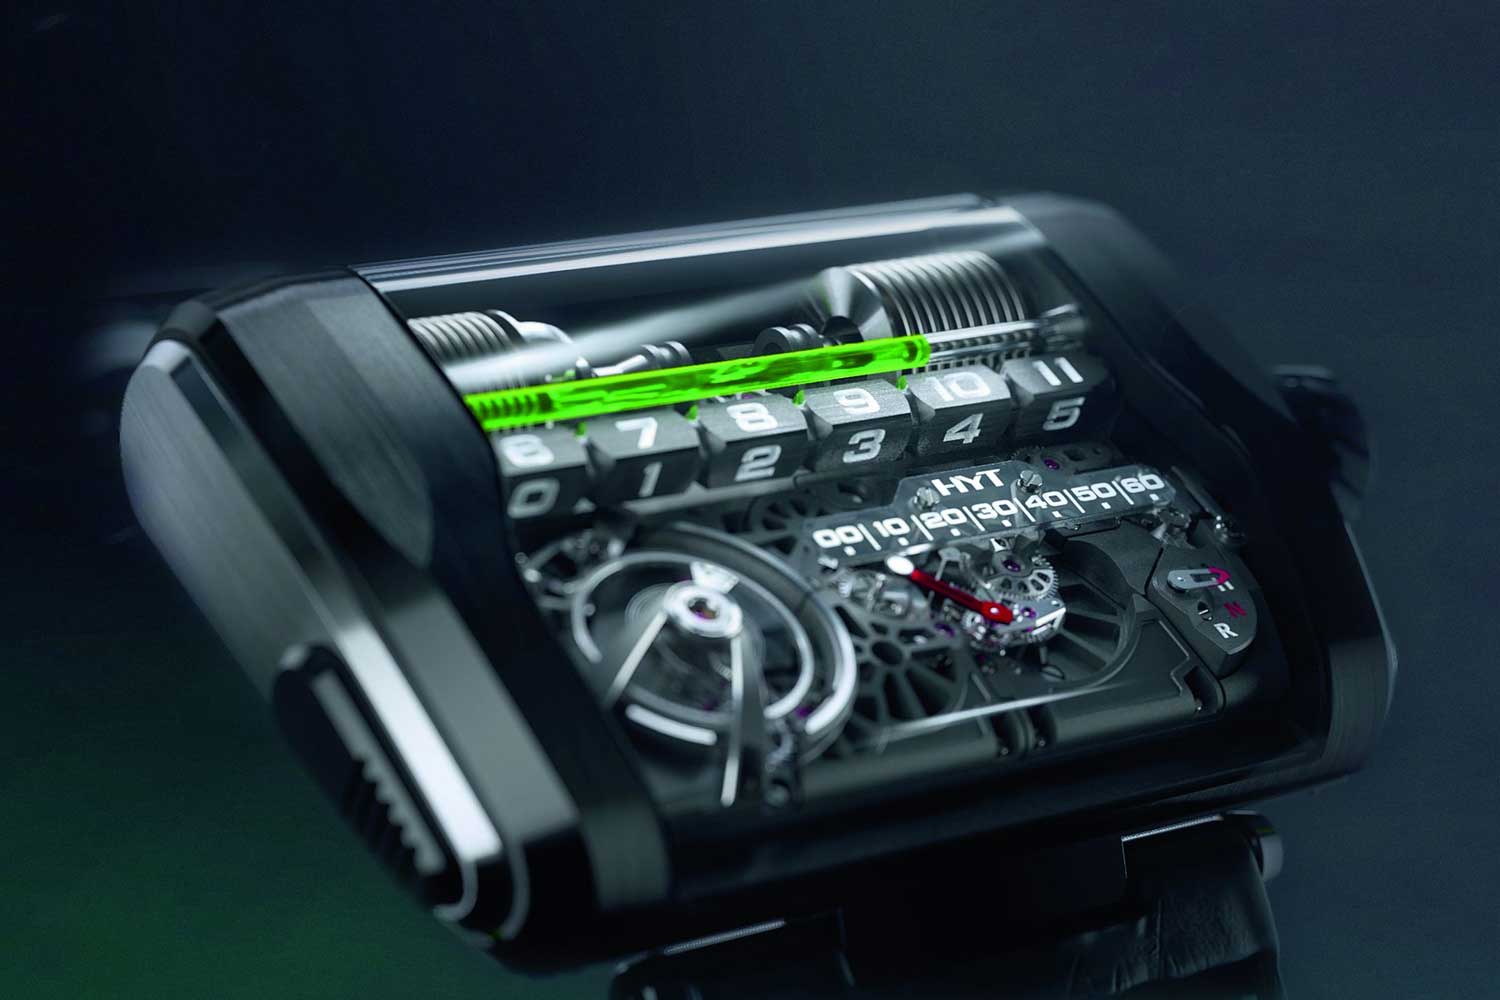 HYT’s H3 has a dual linear display for the hours and minutes, with a liquid tube that is combined with a jumping mechanism for a row of six hour markers which rotate to indicate the speicfic hour as the liquid goes back and forth on the display. A linear minutes display futher indicates the exact time.